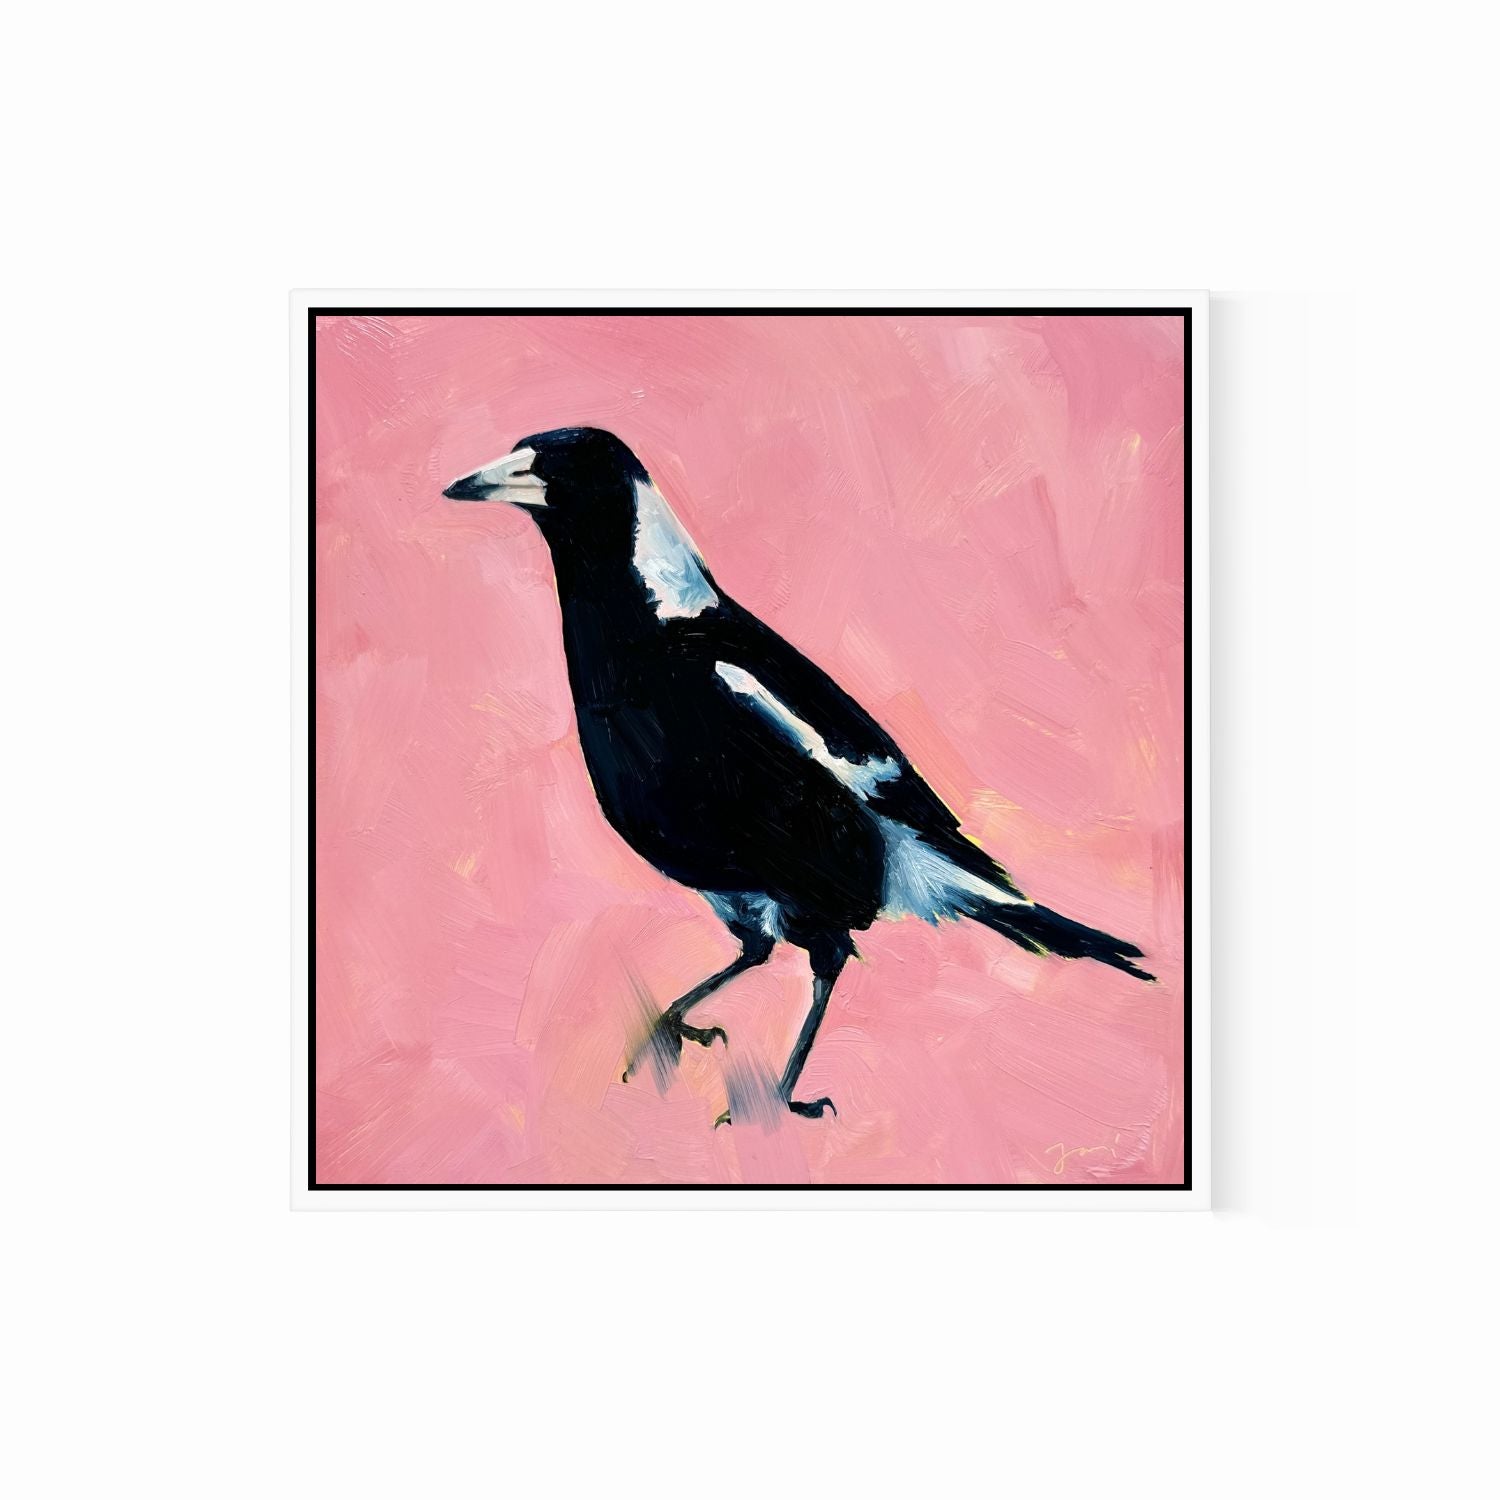 modern and contemporary original oil painting of a colourful navy blue and white magpie on a textured bubble gum pink background